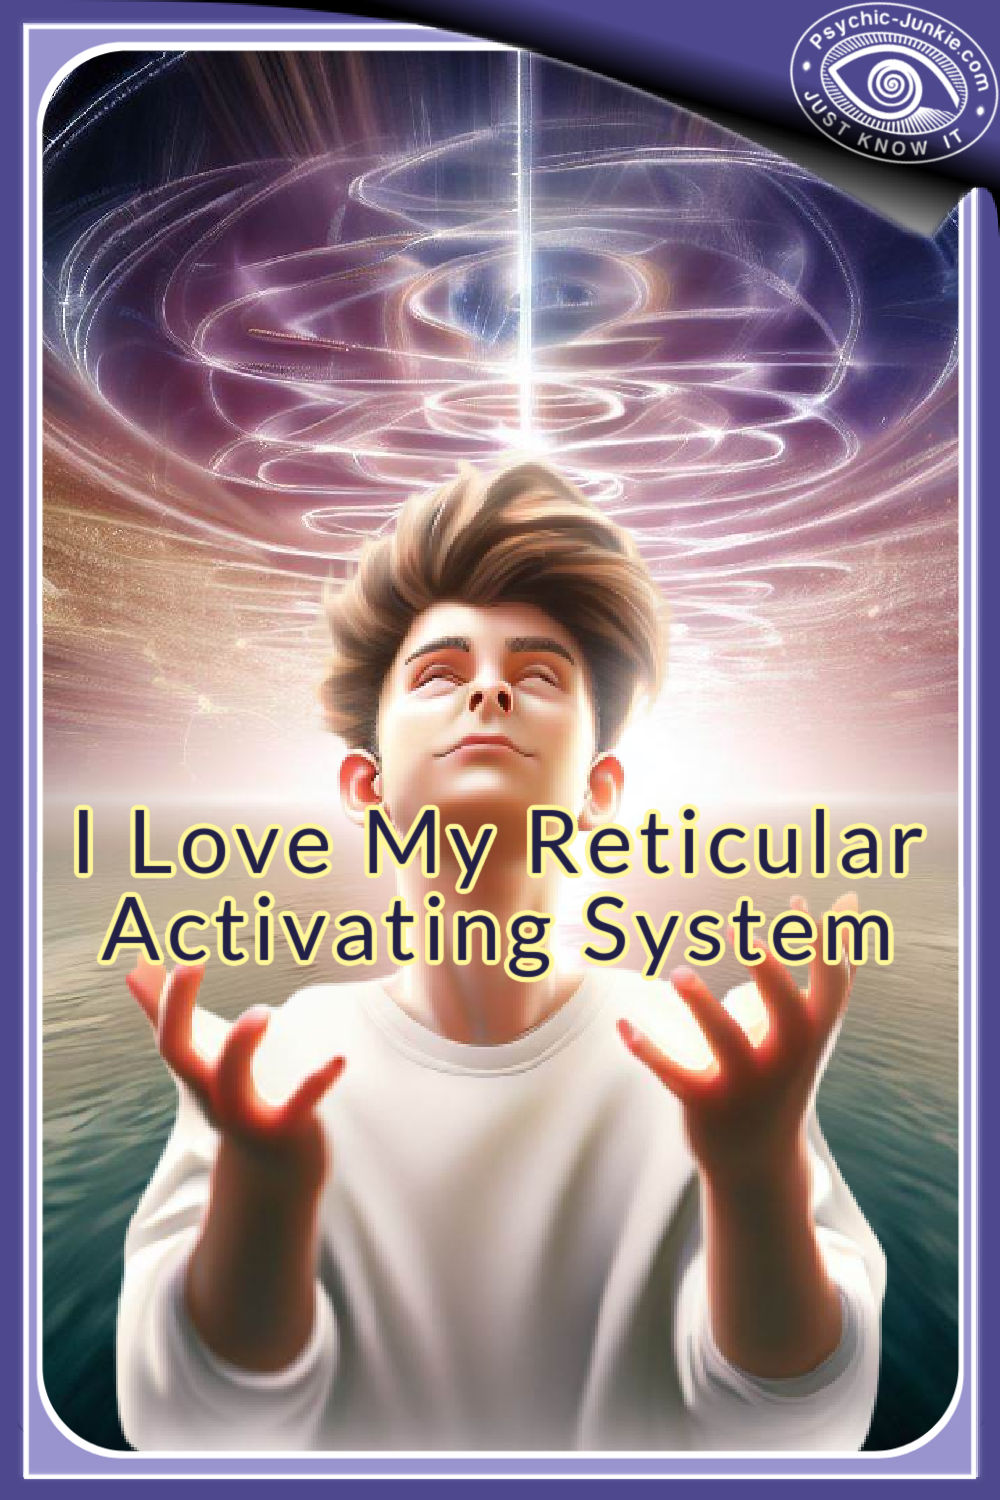 Why is my reticular activating system important?